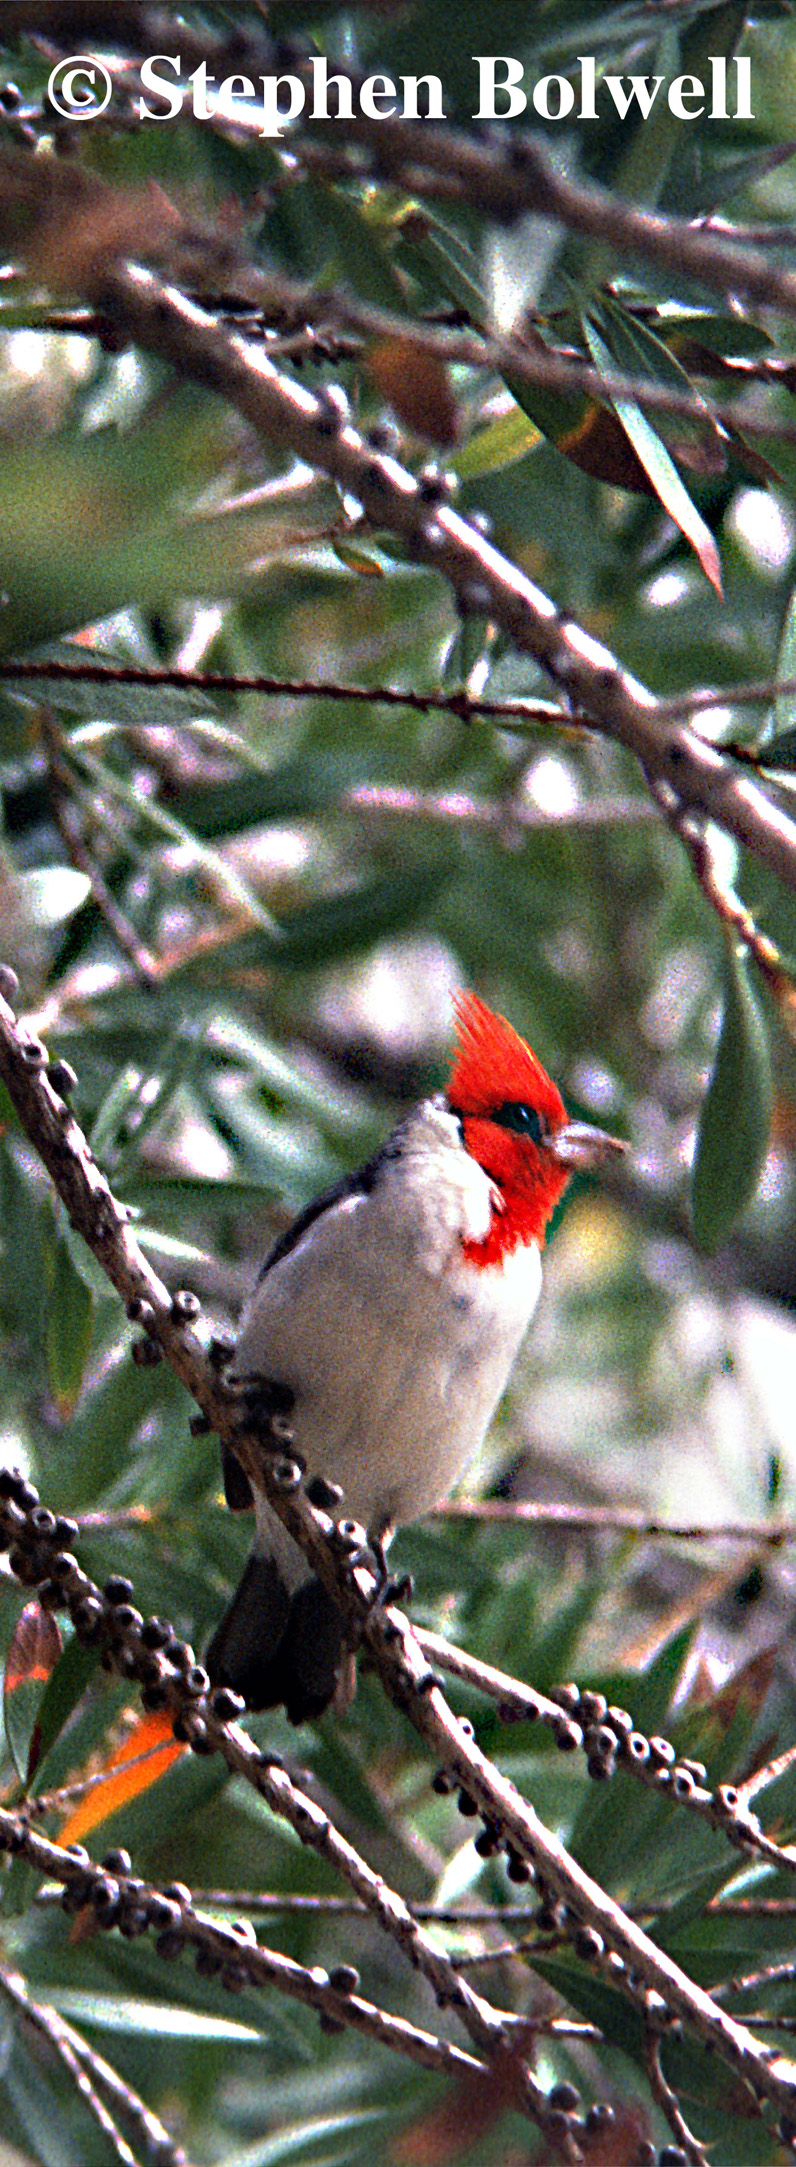 The red-crested cardinal is beautiful, but it is not a native bird.